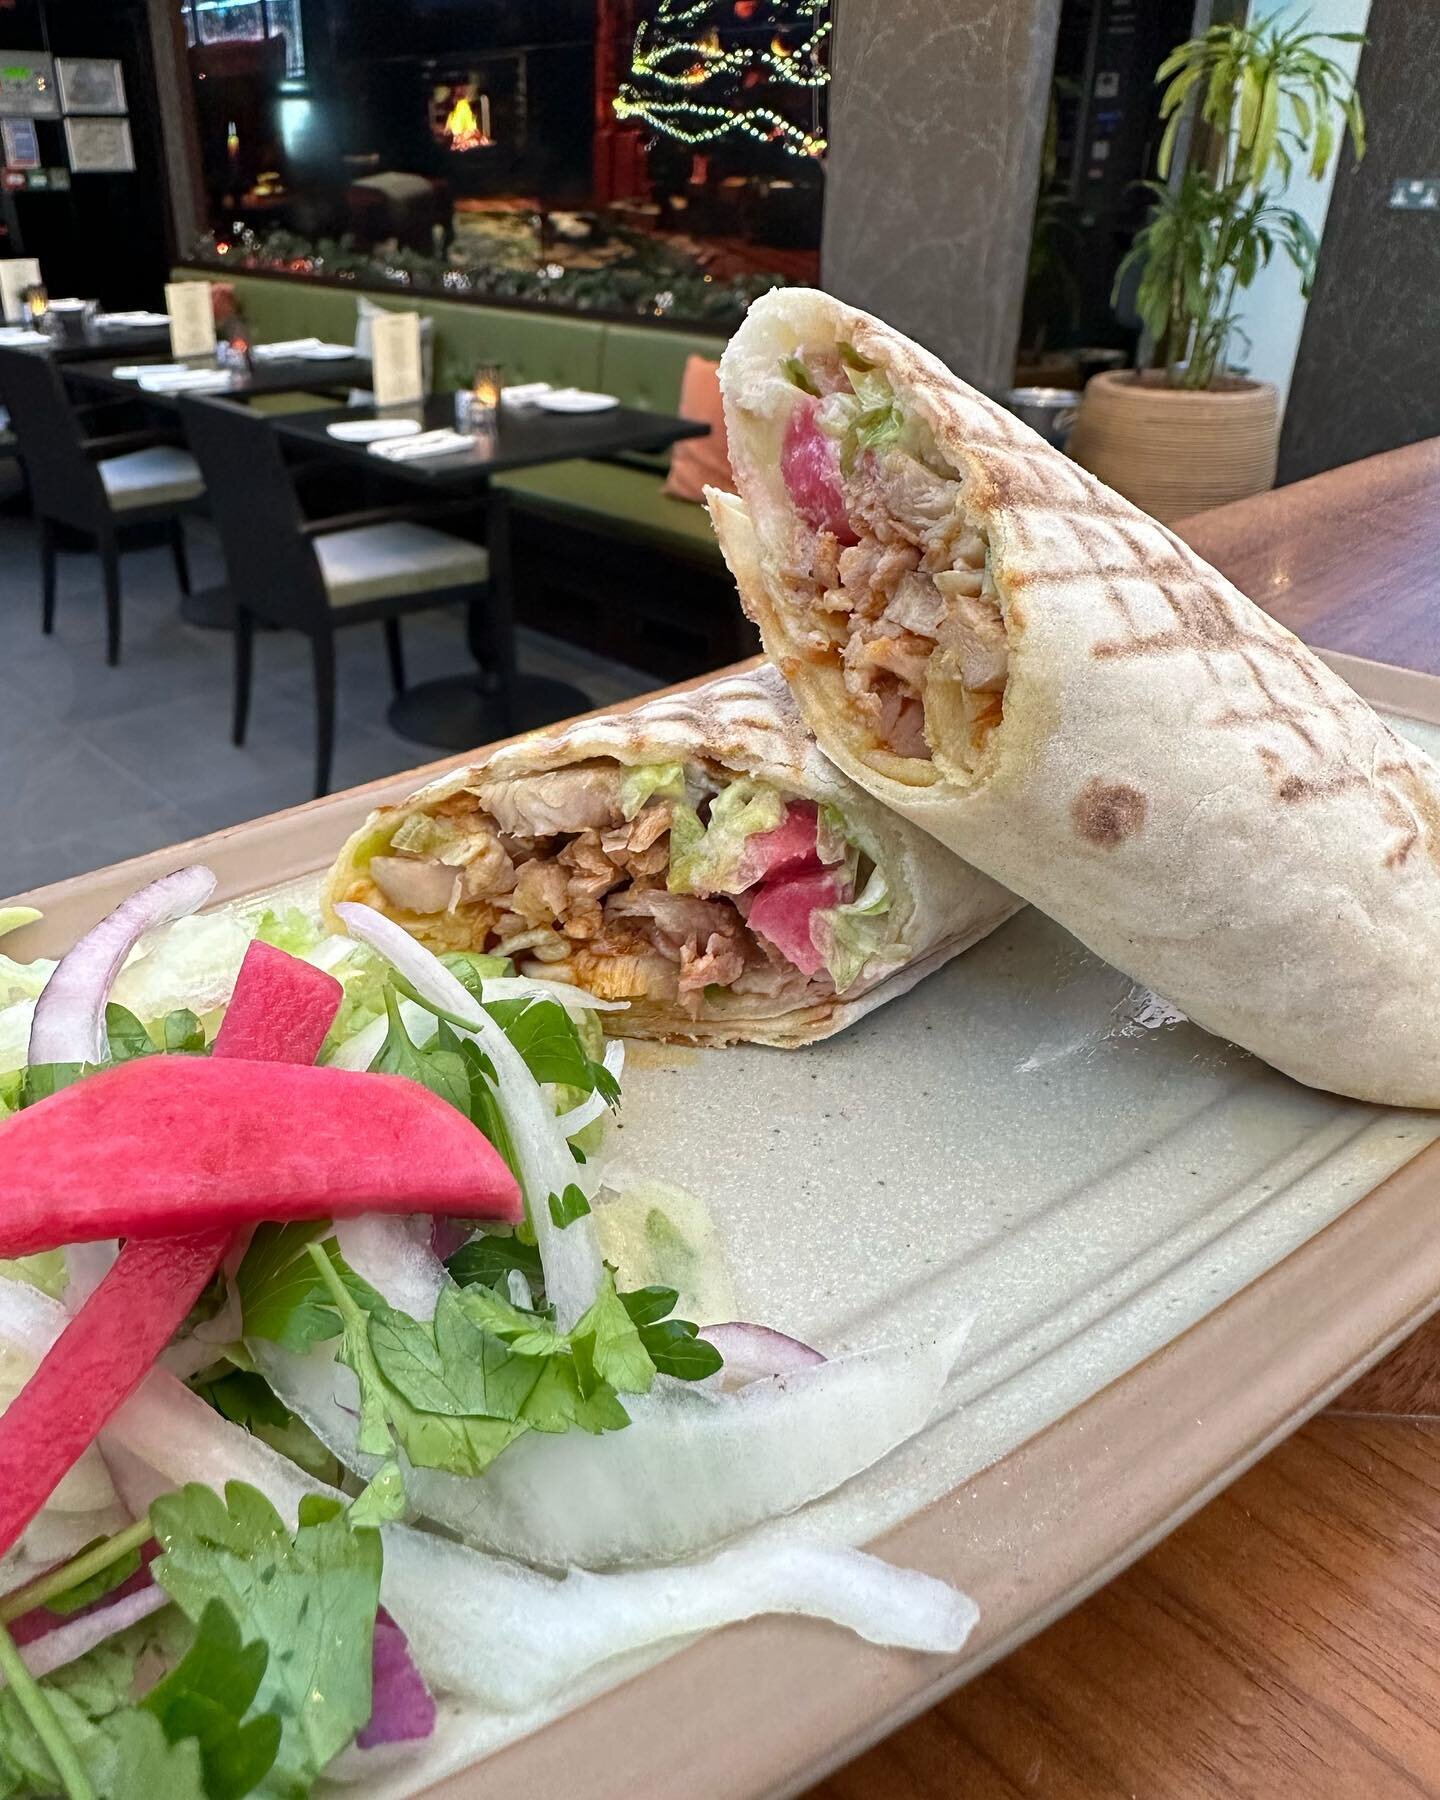 Gluten Free shawarma wrap&hellip; yep! We made it. Home made gluten free bread filled with our thinly sliced roasted shawarma dripping with that succulent marinade, garlic, pickled turnips, tomato. Yum yummy 😋 

Please note the gluten free bread is 